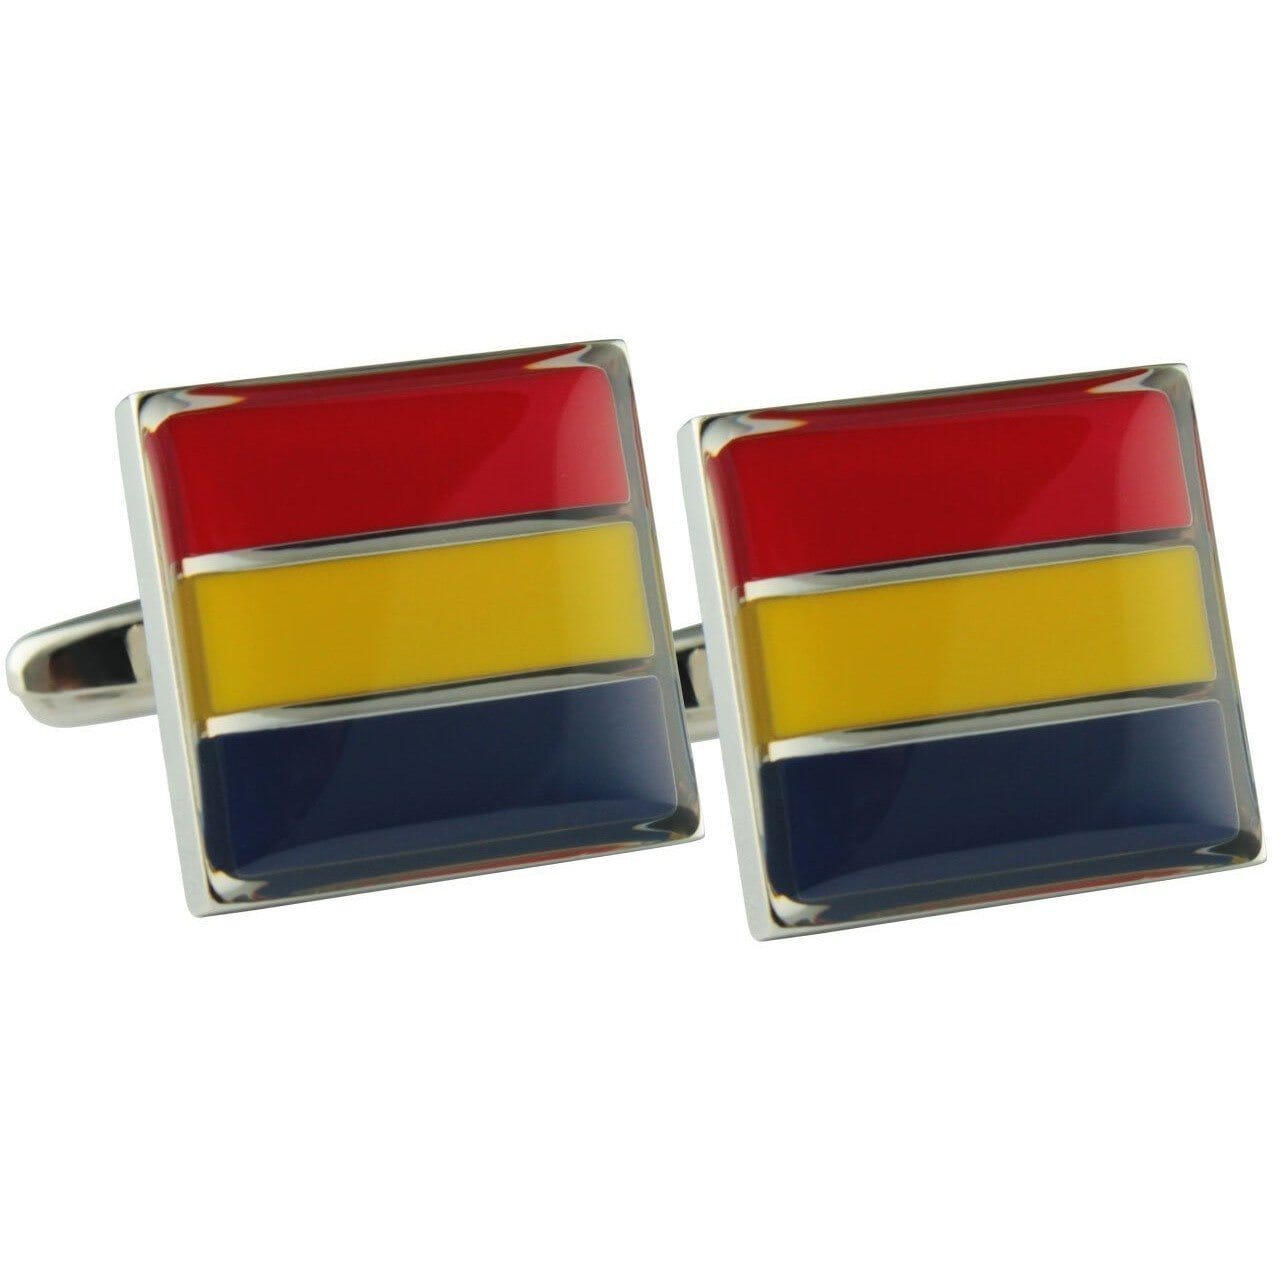 Colour Adelaide Crows AFL Cufflinks Novelty Cufflinks AFL Colour Adelaide Crows AFL Cufflinks 